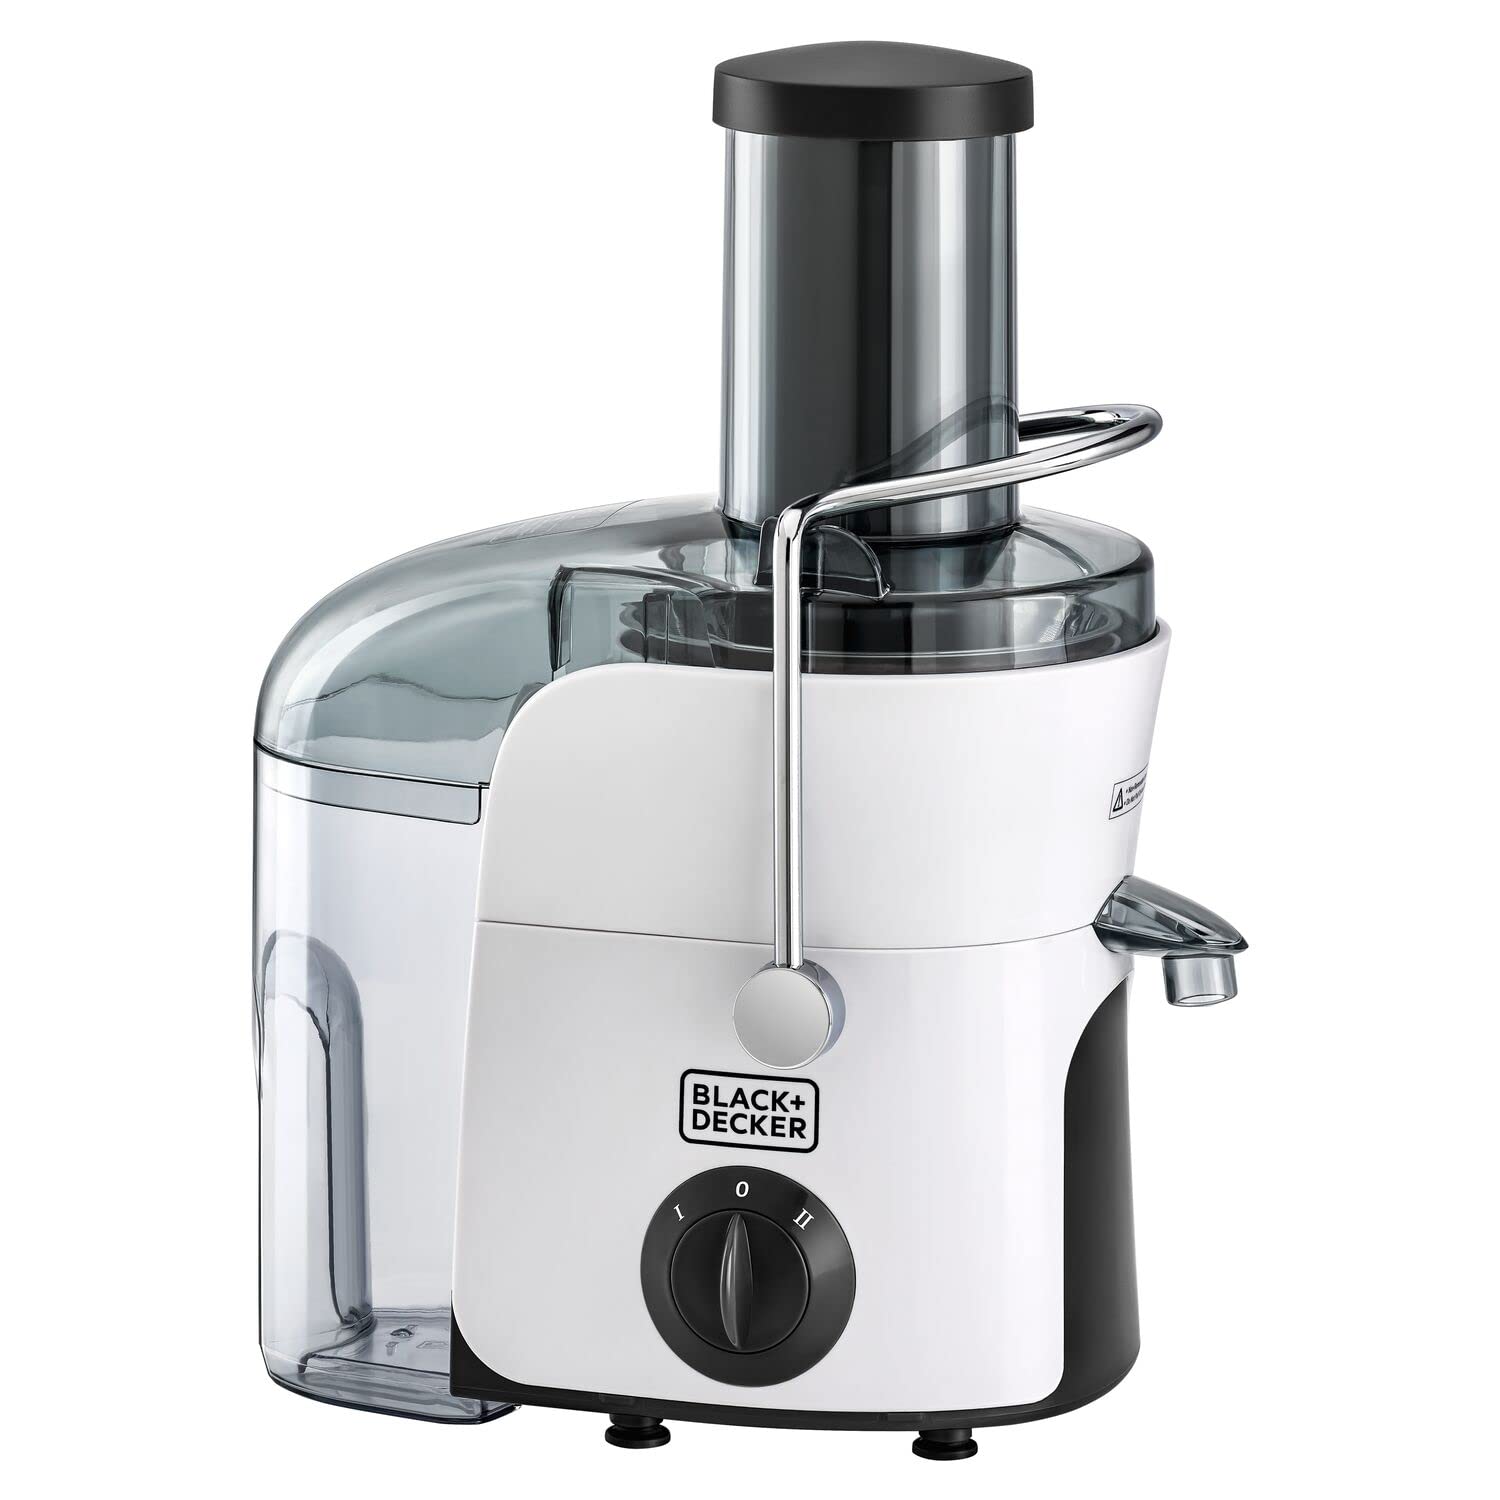 Black & Decker Juicer Extractor, 800W Power with Copper Motor, 500ml Juice collector, 1.5L Large pulp container, 2 Speed Control